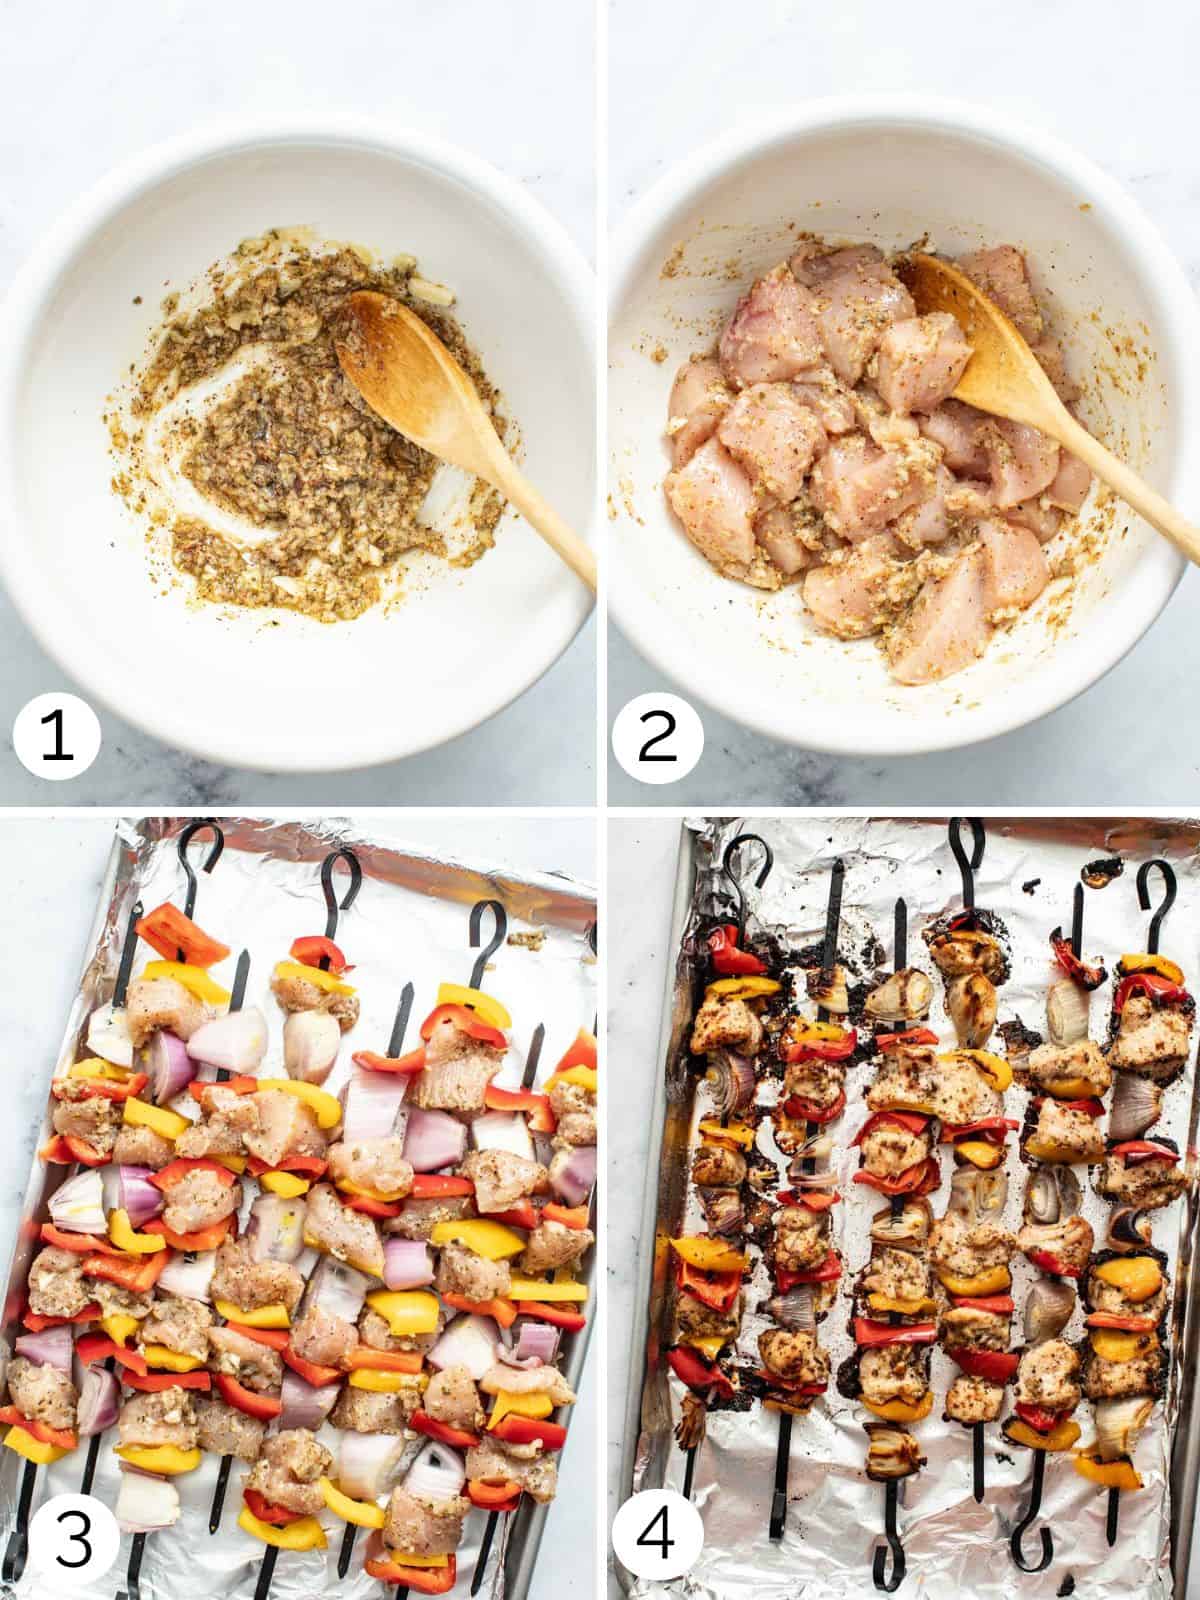 Process photos for how to making chicken kabobs in the oven, from marinating the meat to threading the skewers and baking.